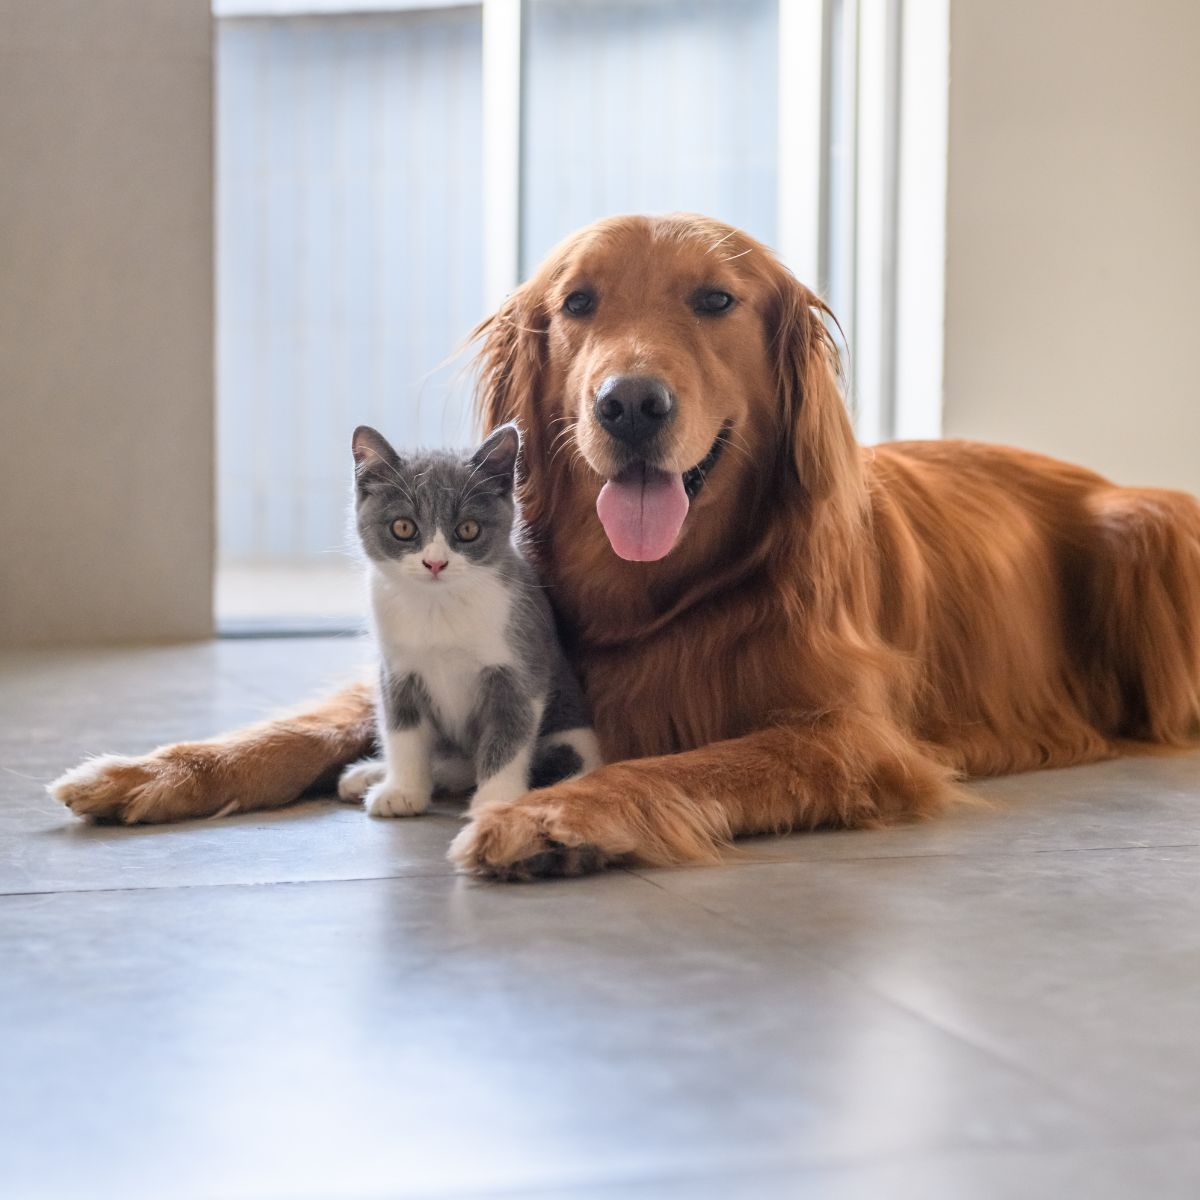 A Golden Retriever and a kitten laying together on floor